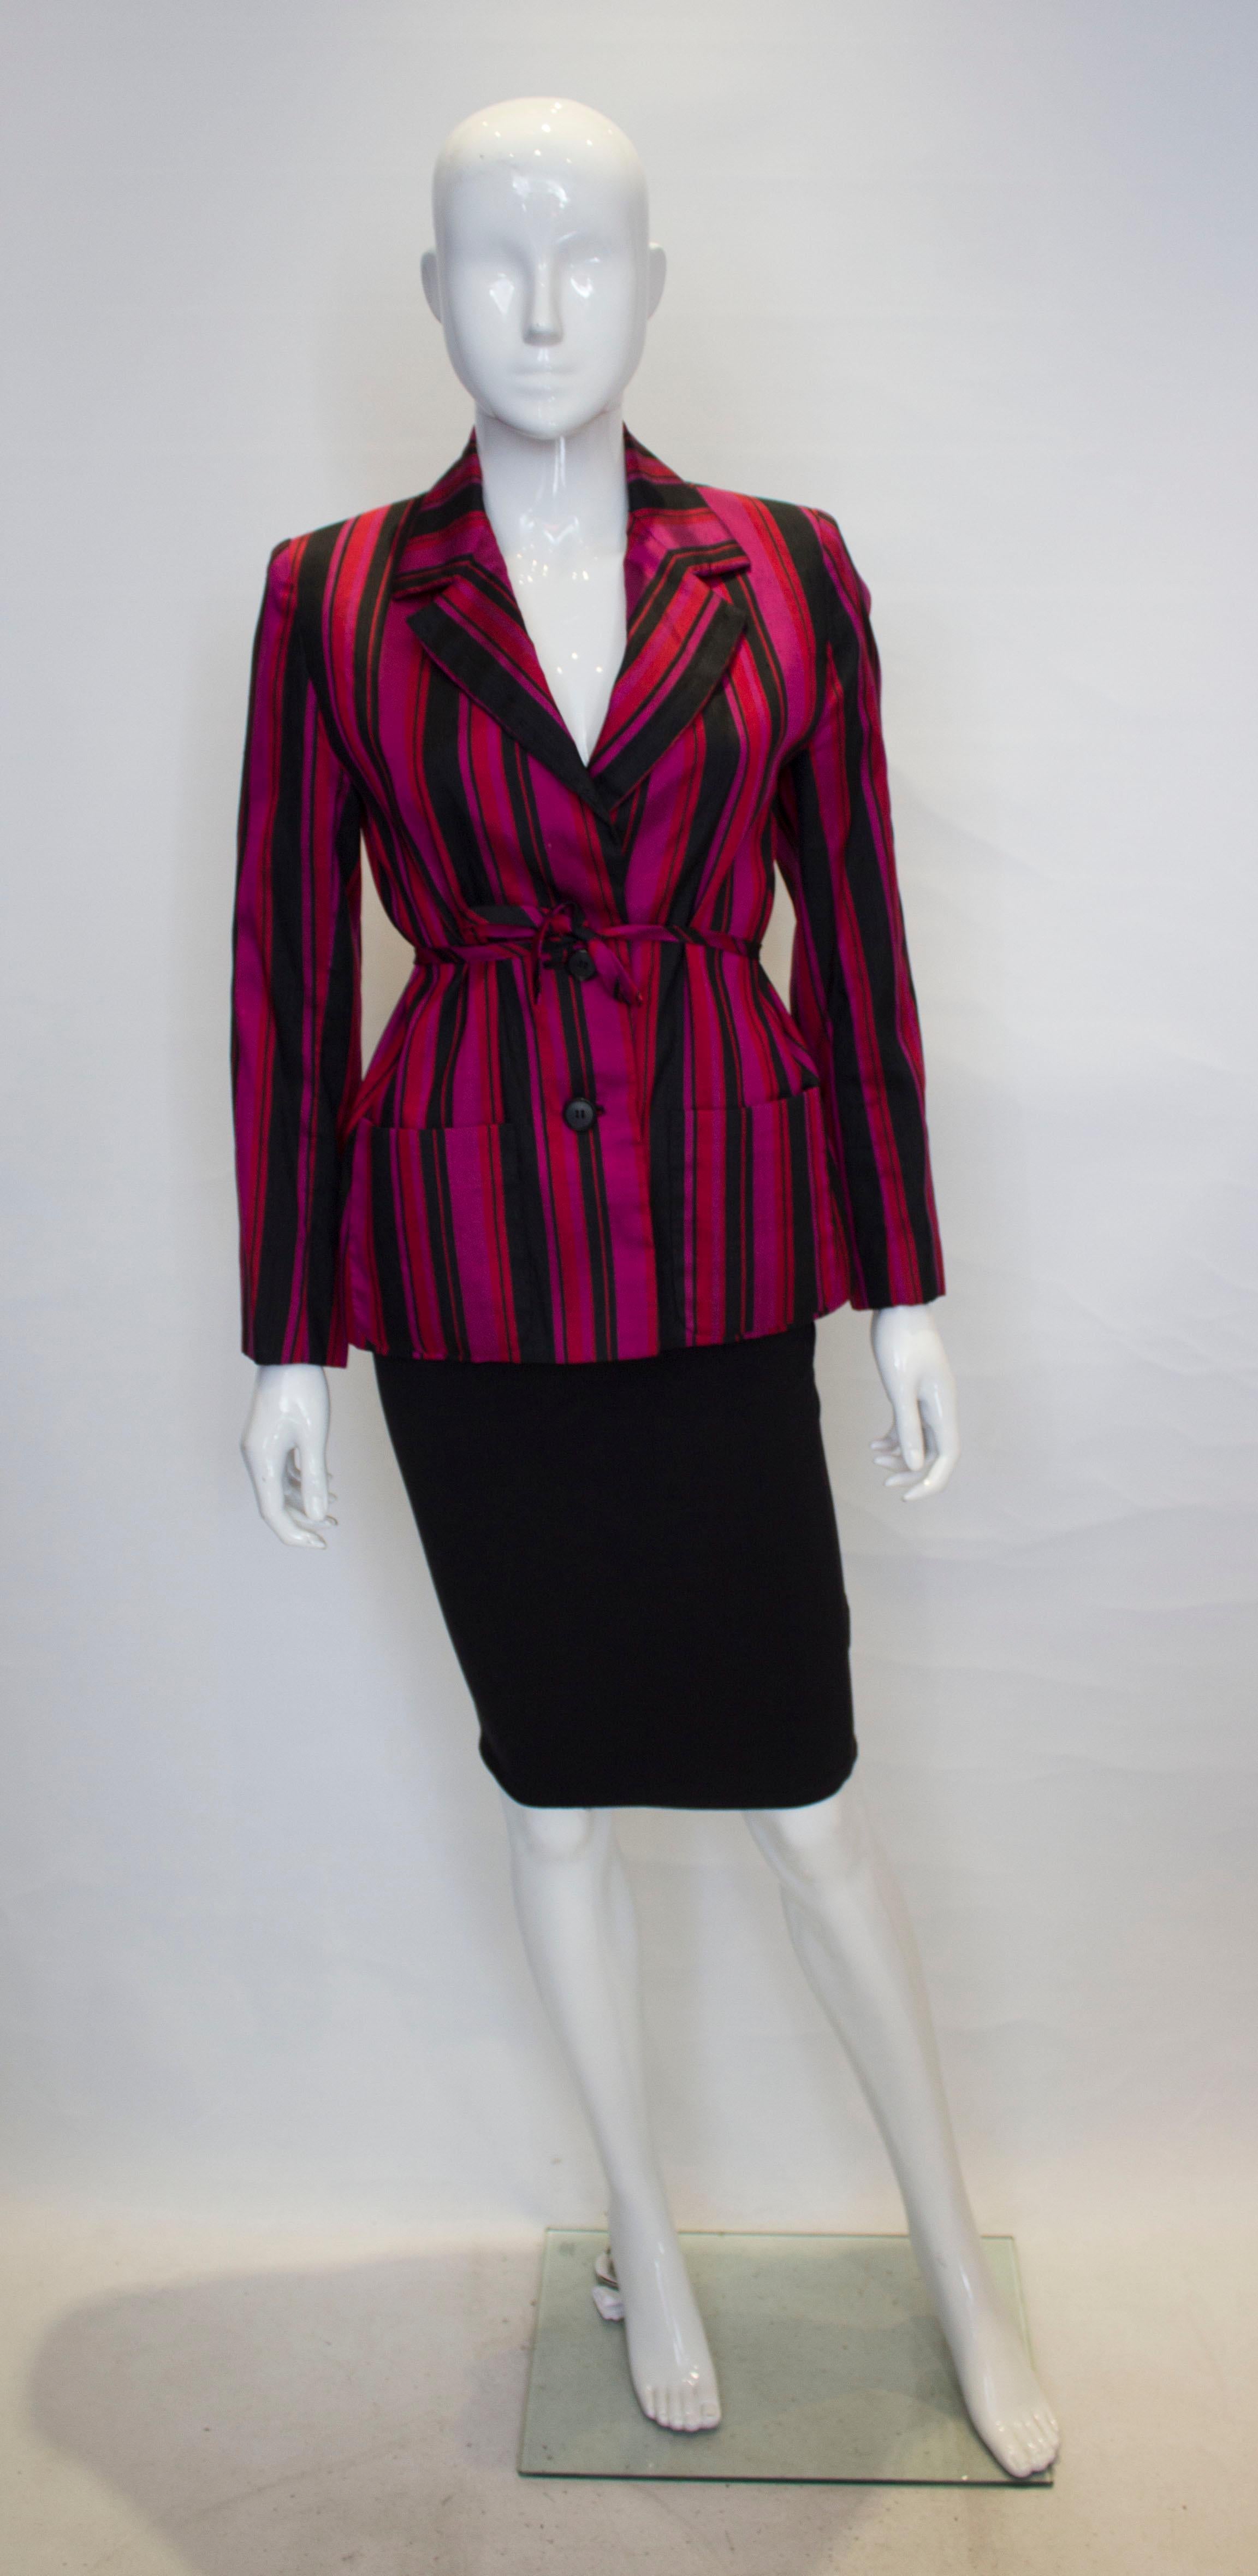 A stunning silk vintage jacket by Norman Hartnell, Le petit salon line.
The jacket is in a wonderful colour clash of red, pink and black. It has a two button front opening with two front pockets and is fully lined. 